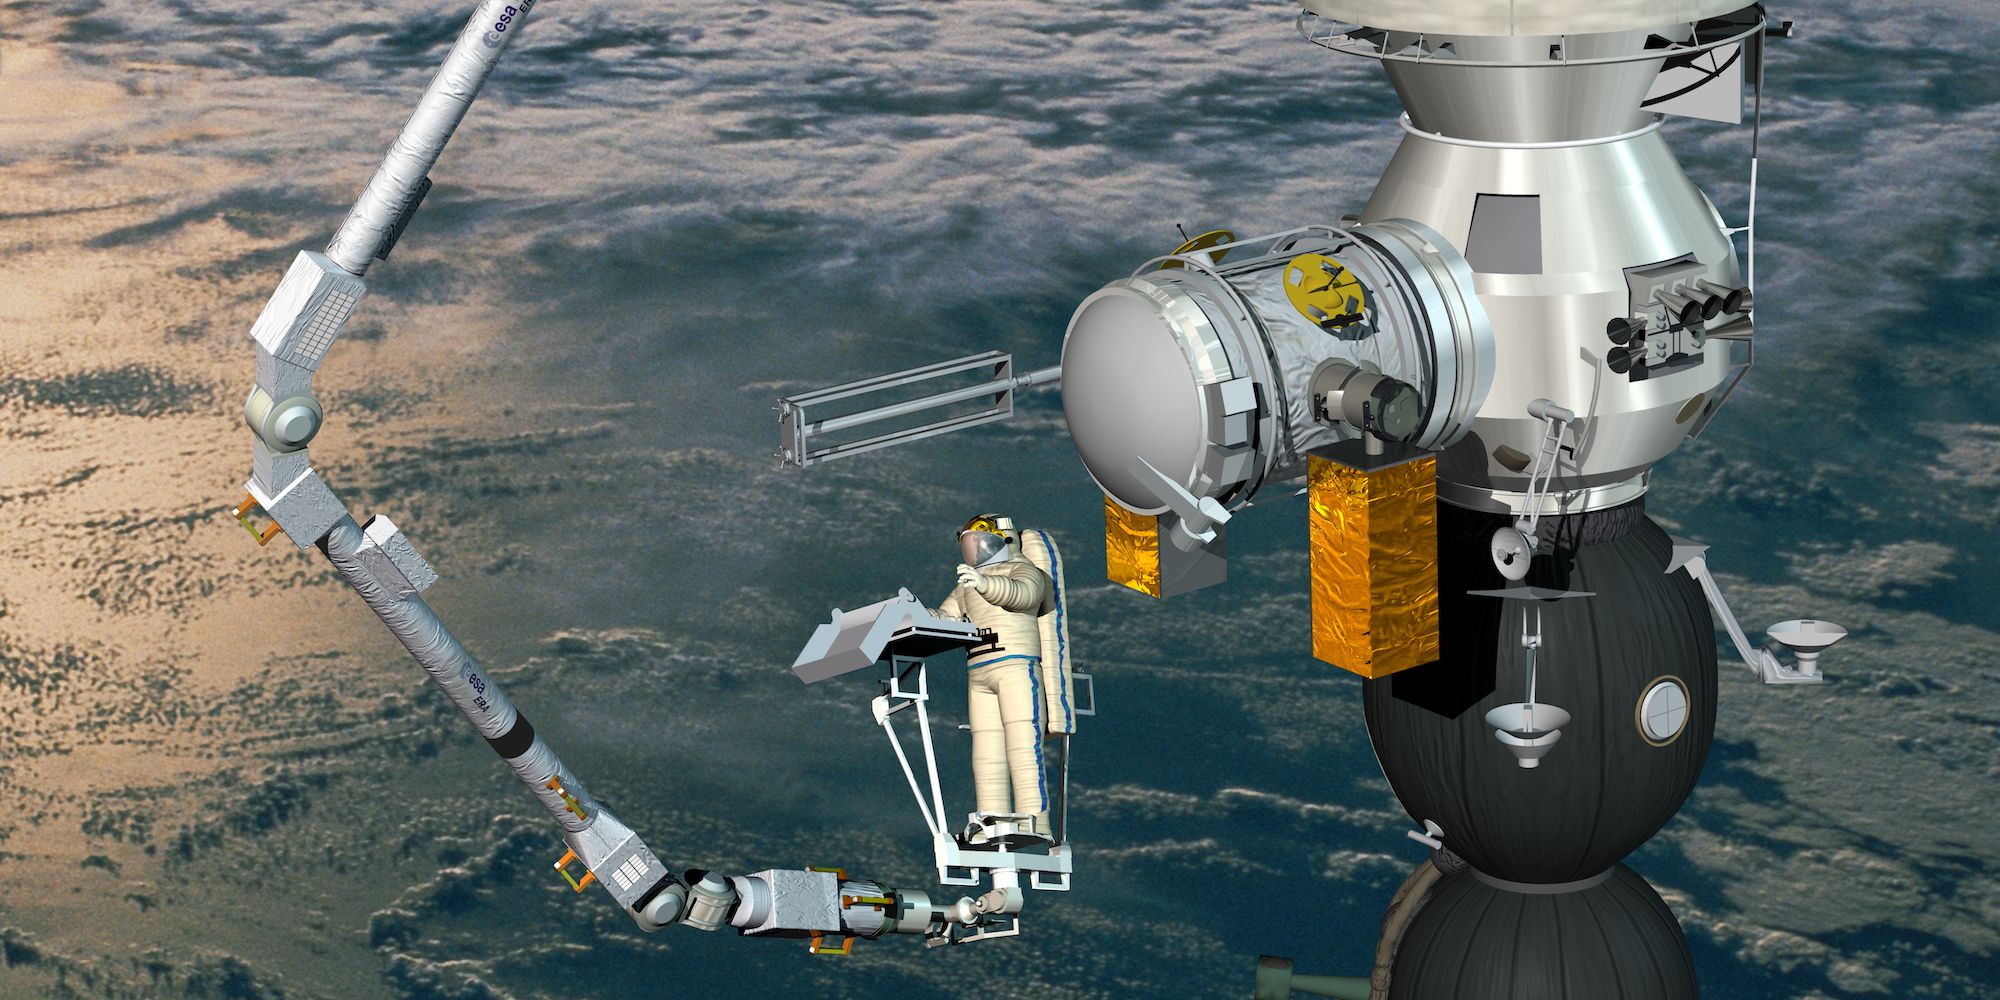 Hibernating Robotic Space Arm Wakes Up To Transfer Object On The ISS